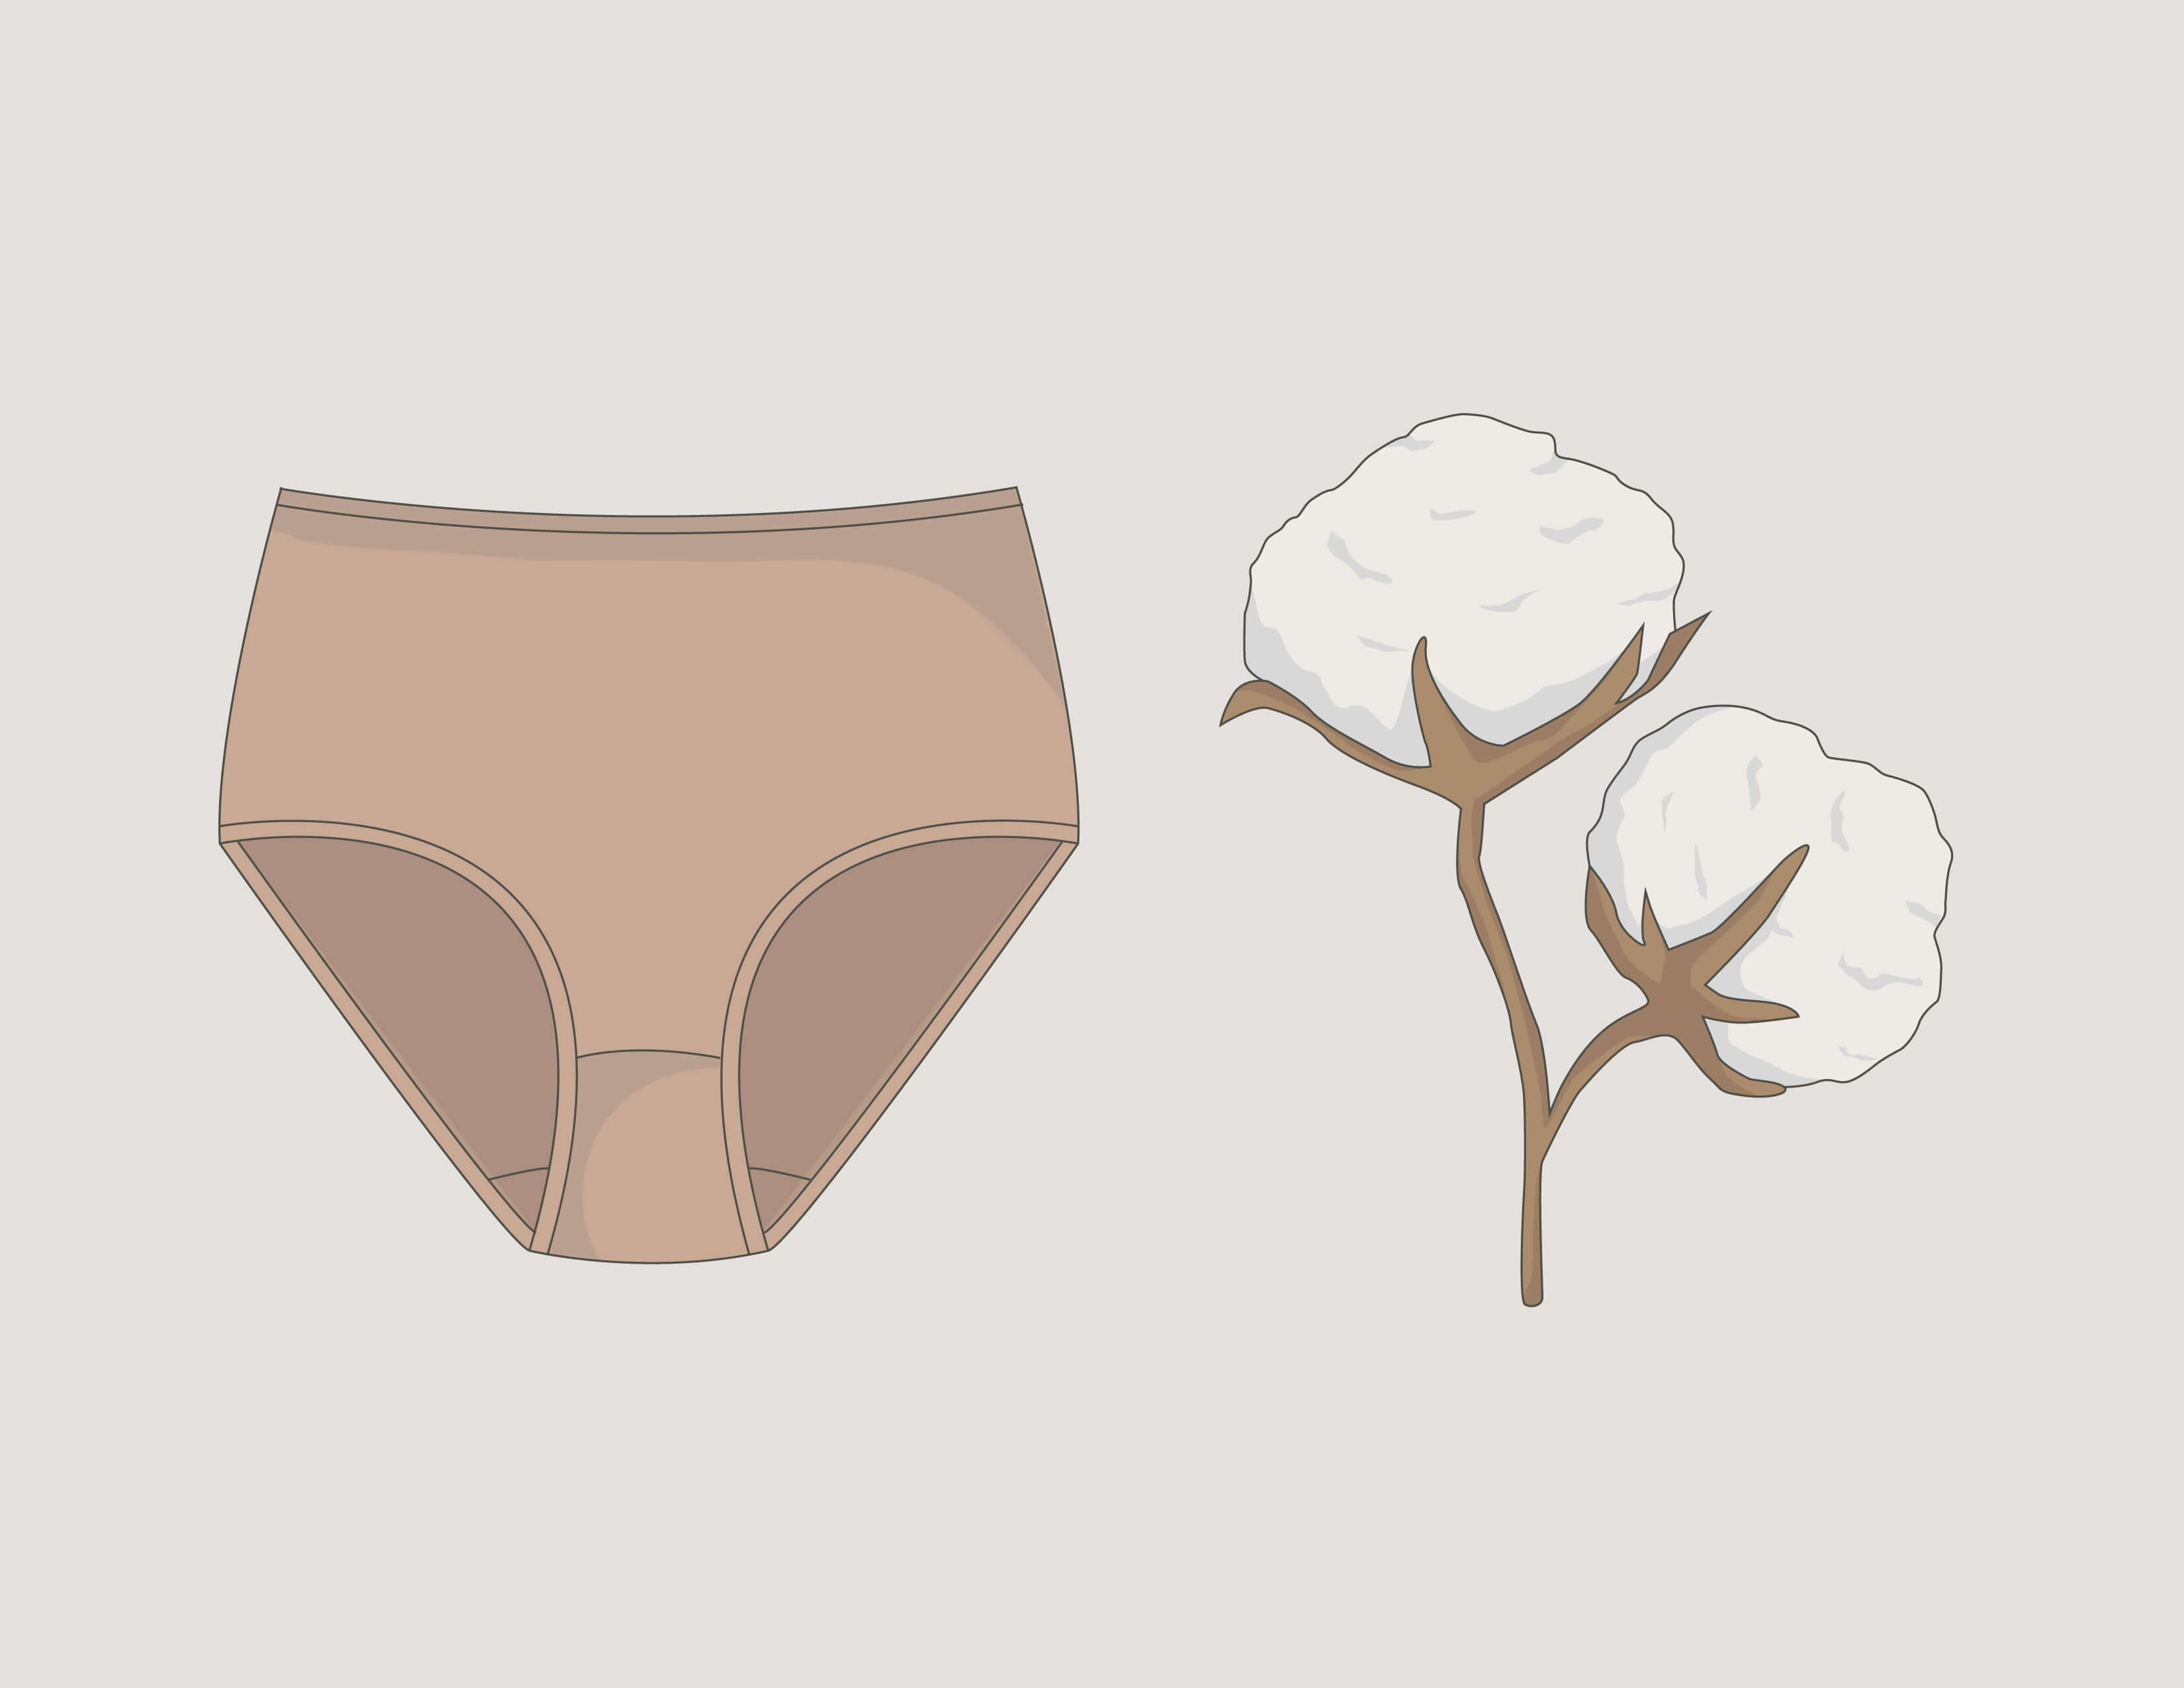 How to Choose the Right Underwear for Women - Fashion2Apparel